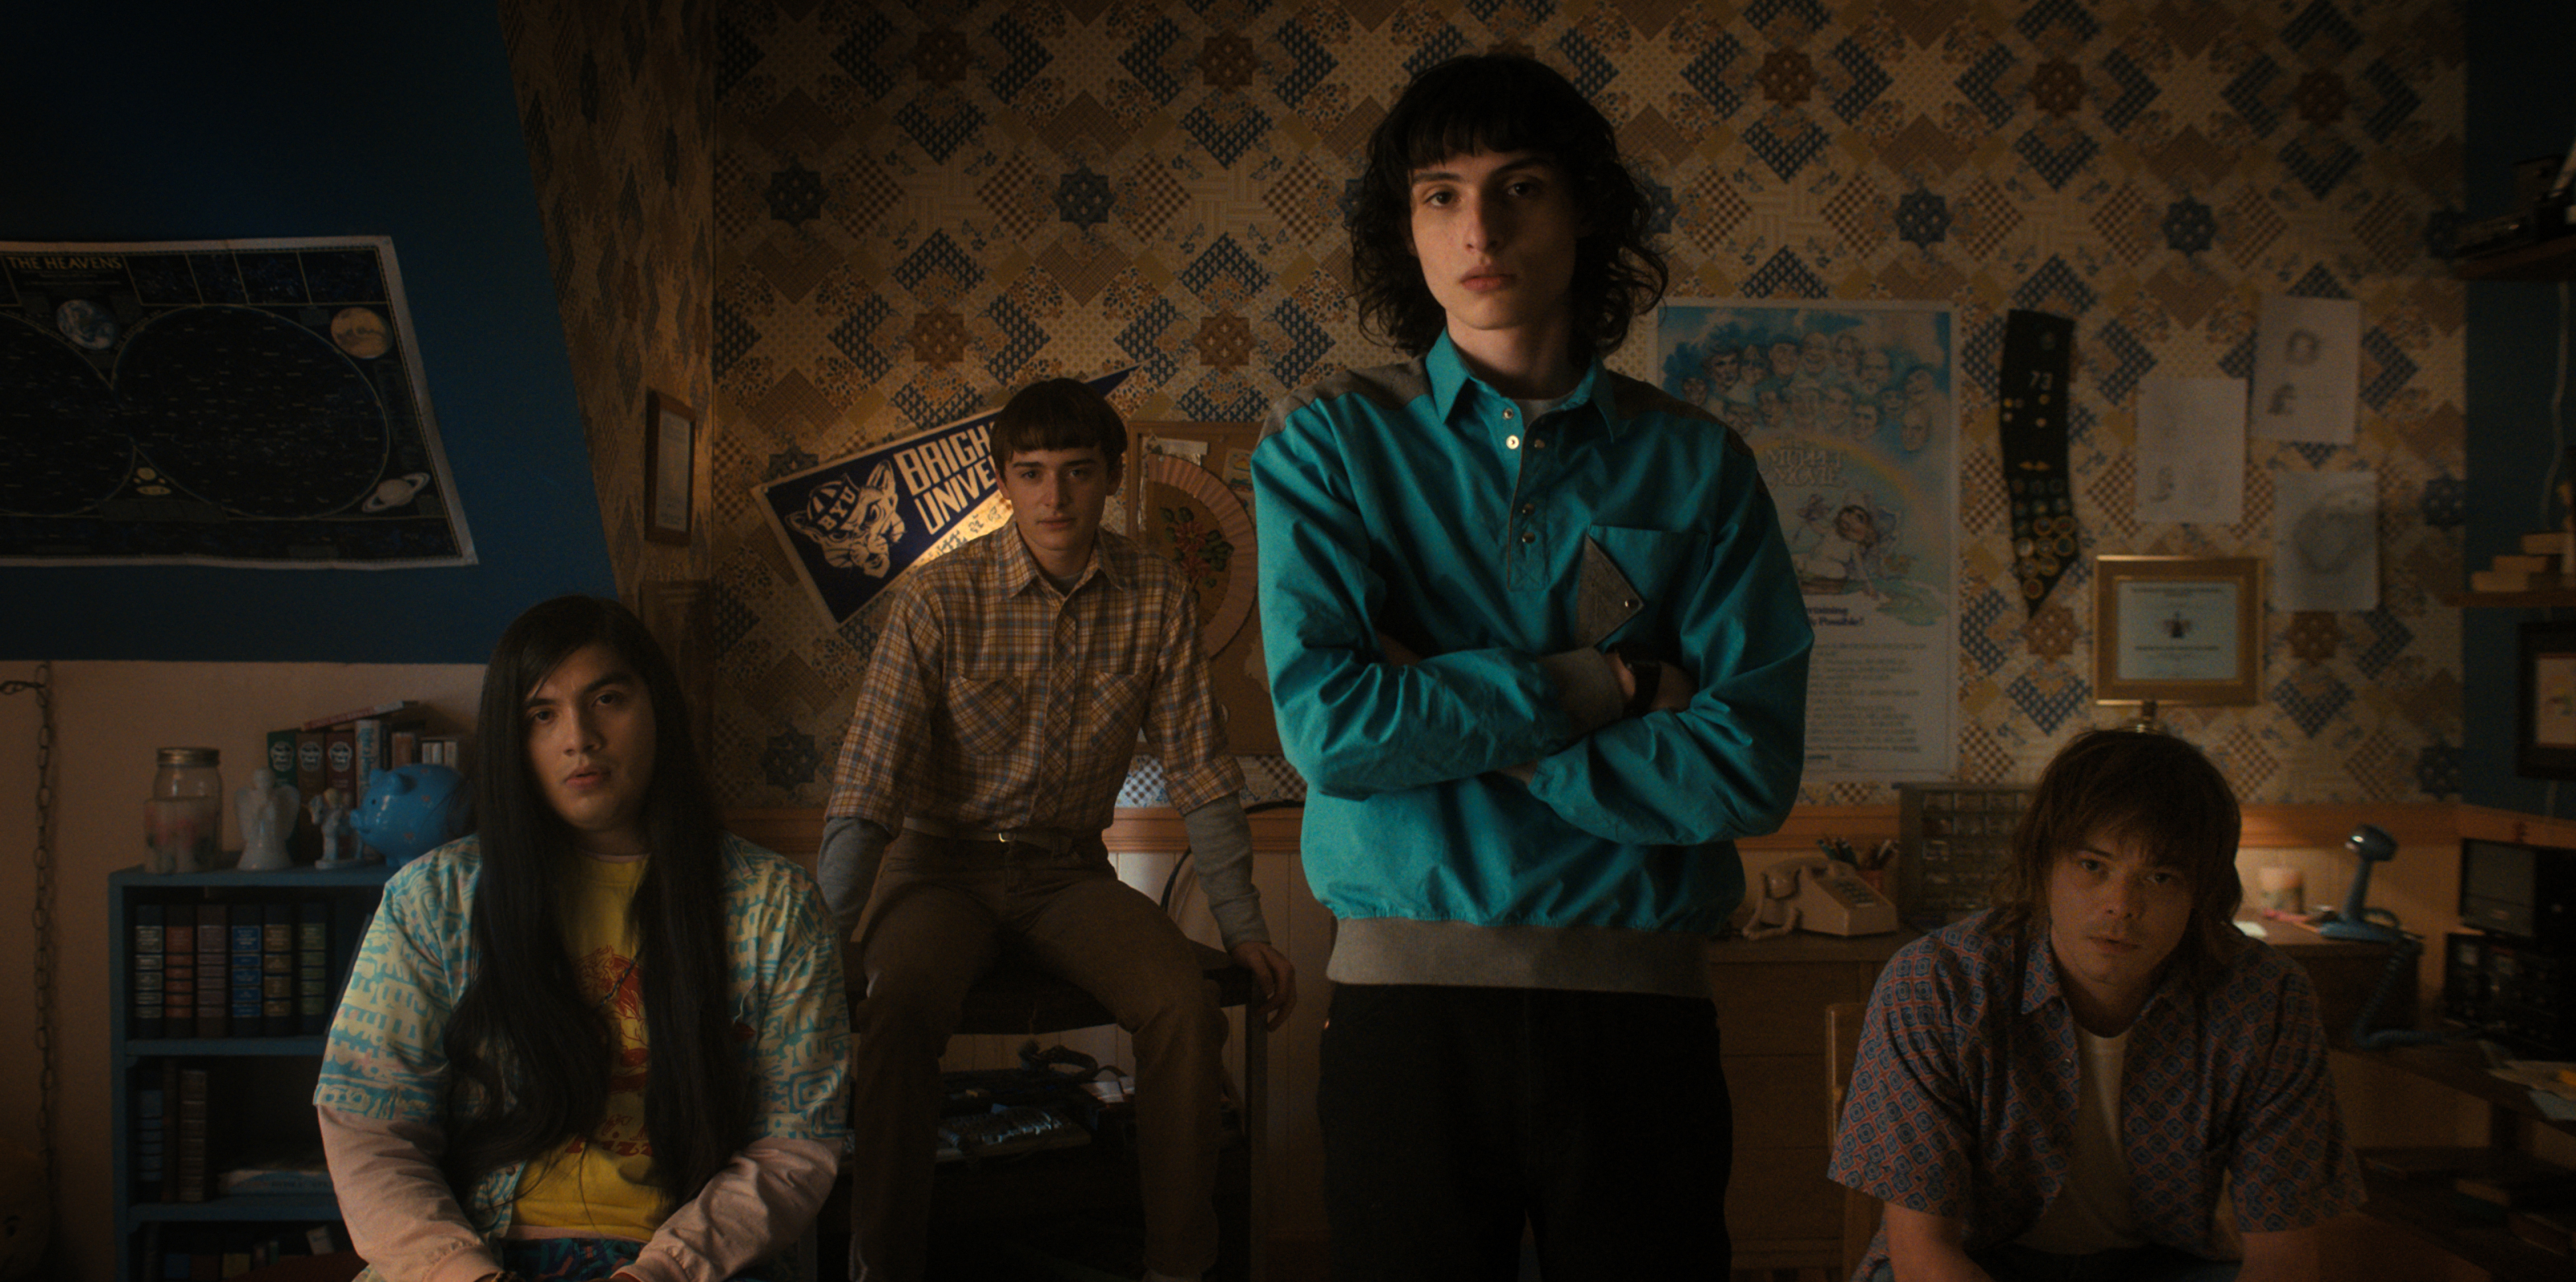 Stranger Things' creators answer questions about Season 2 finale